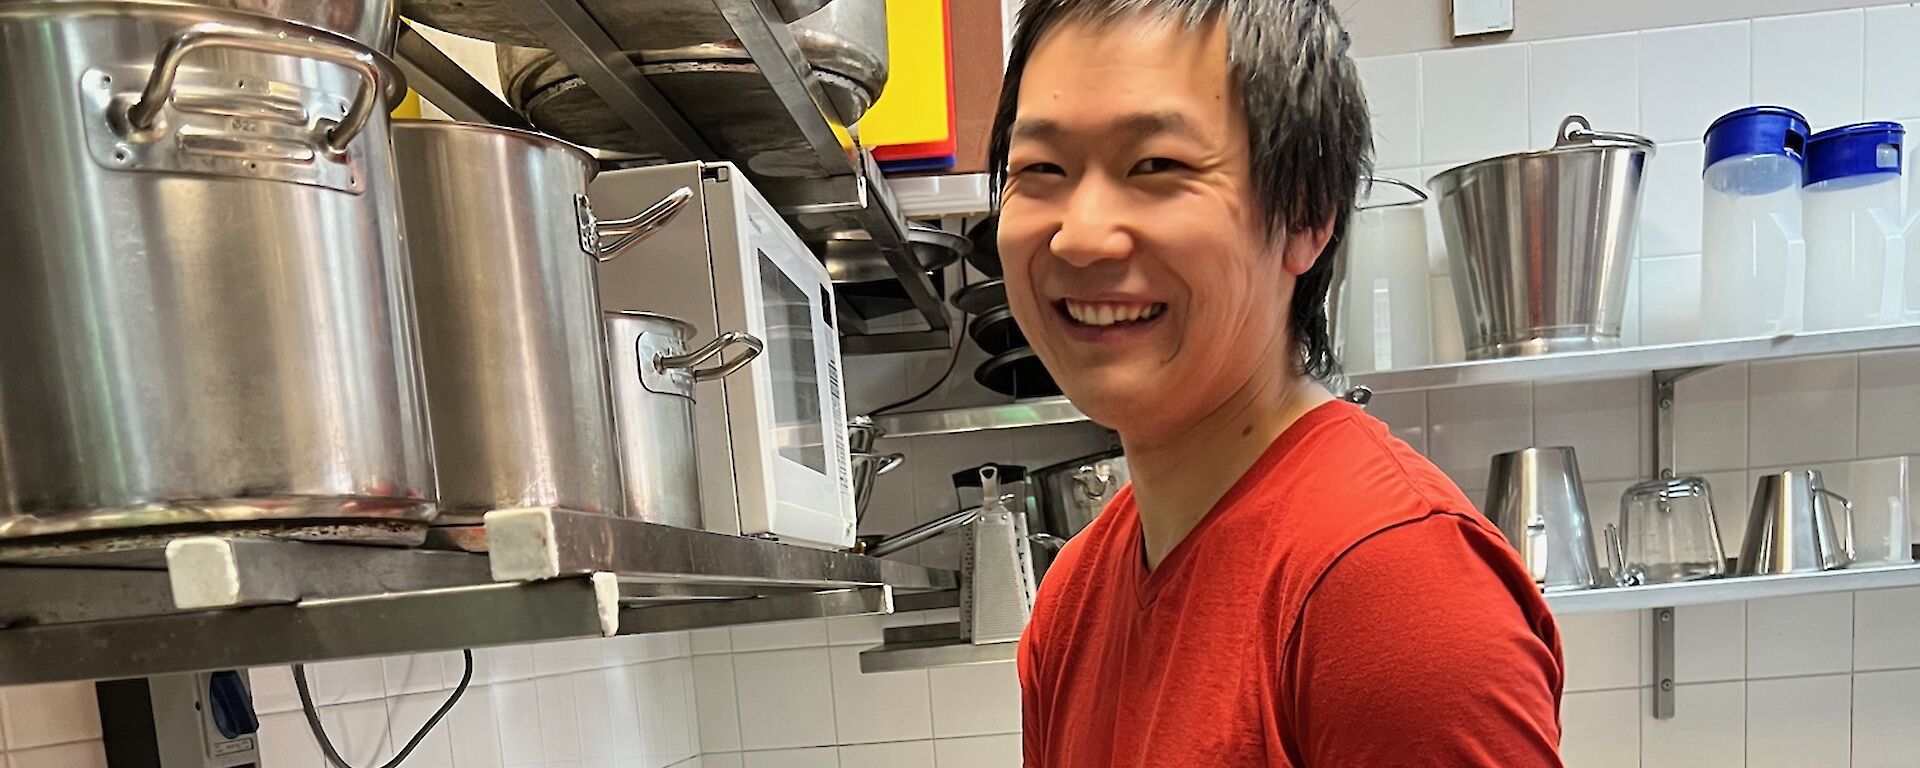 Man in a red t-shirt stands at a kitchen bench making dumplings